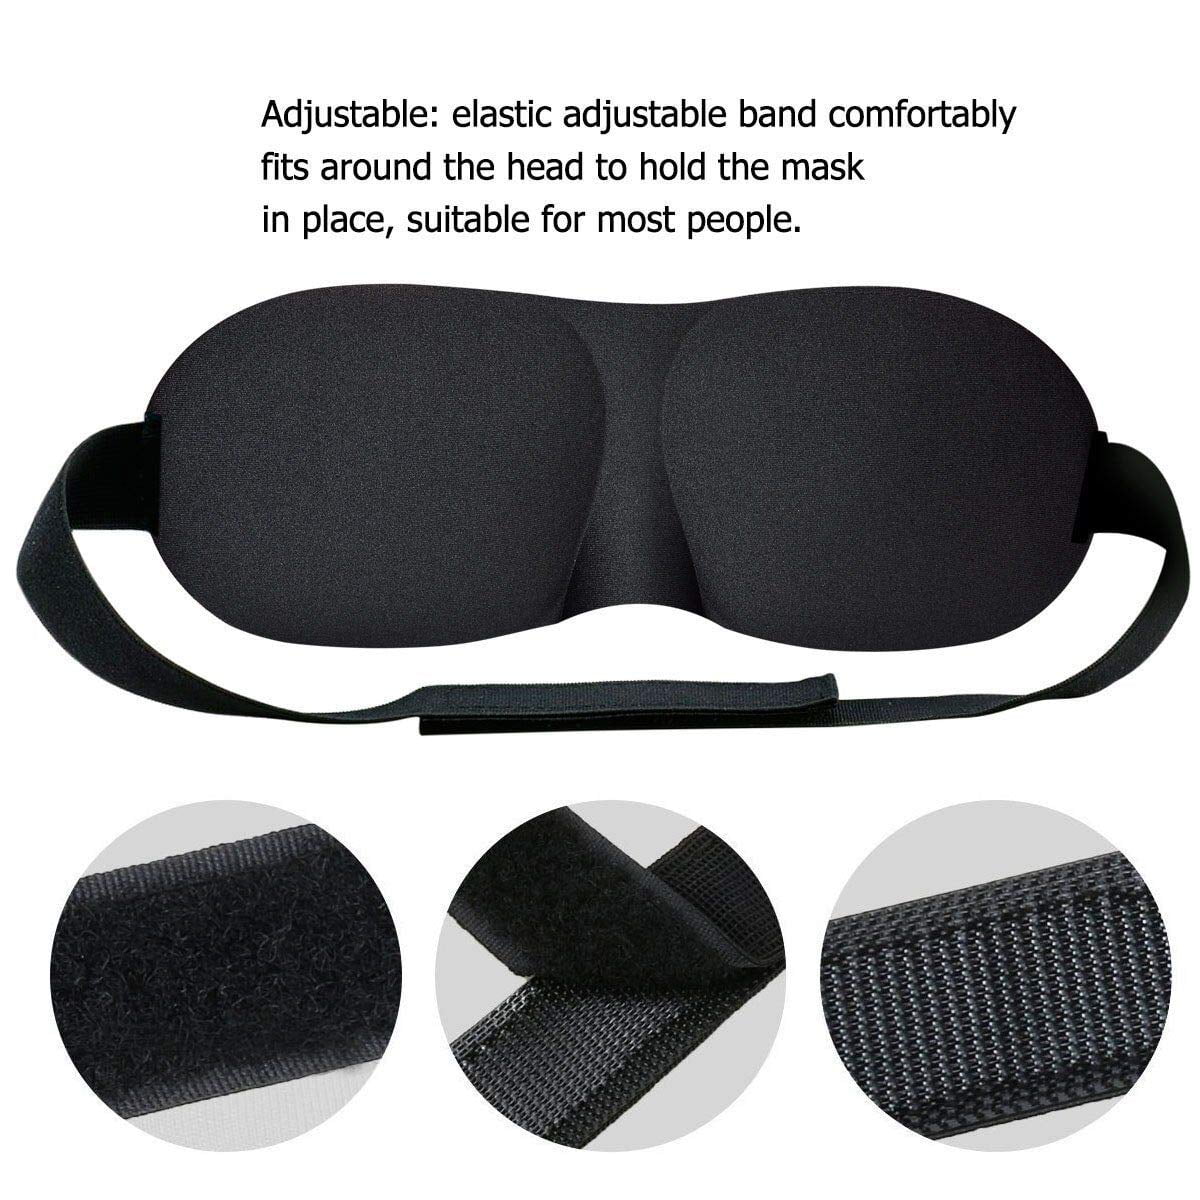 Sleep Masks,Eye mask,Sleeping mask,Eye Masks for Sleeping Women & Men New Upgraded 3D Contoured,Ultra Soft Breathable with Adjustable Strap and Ear Plugs 100% Blackout Blindfold for Darkness